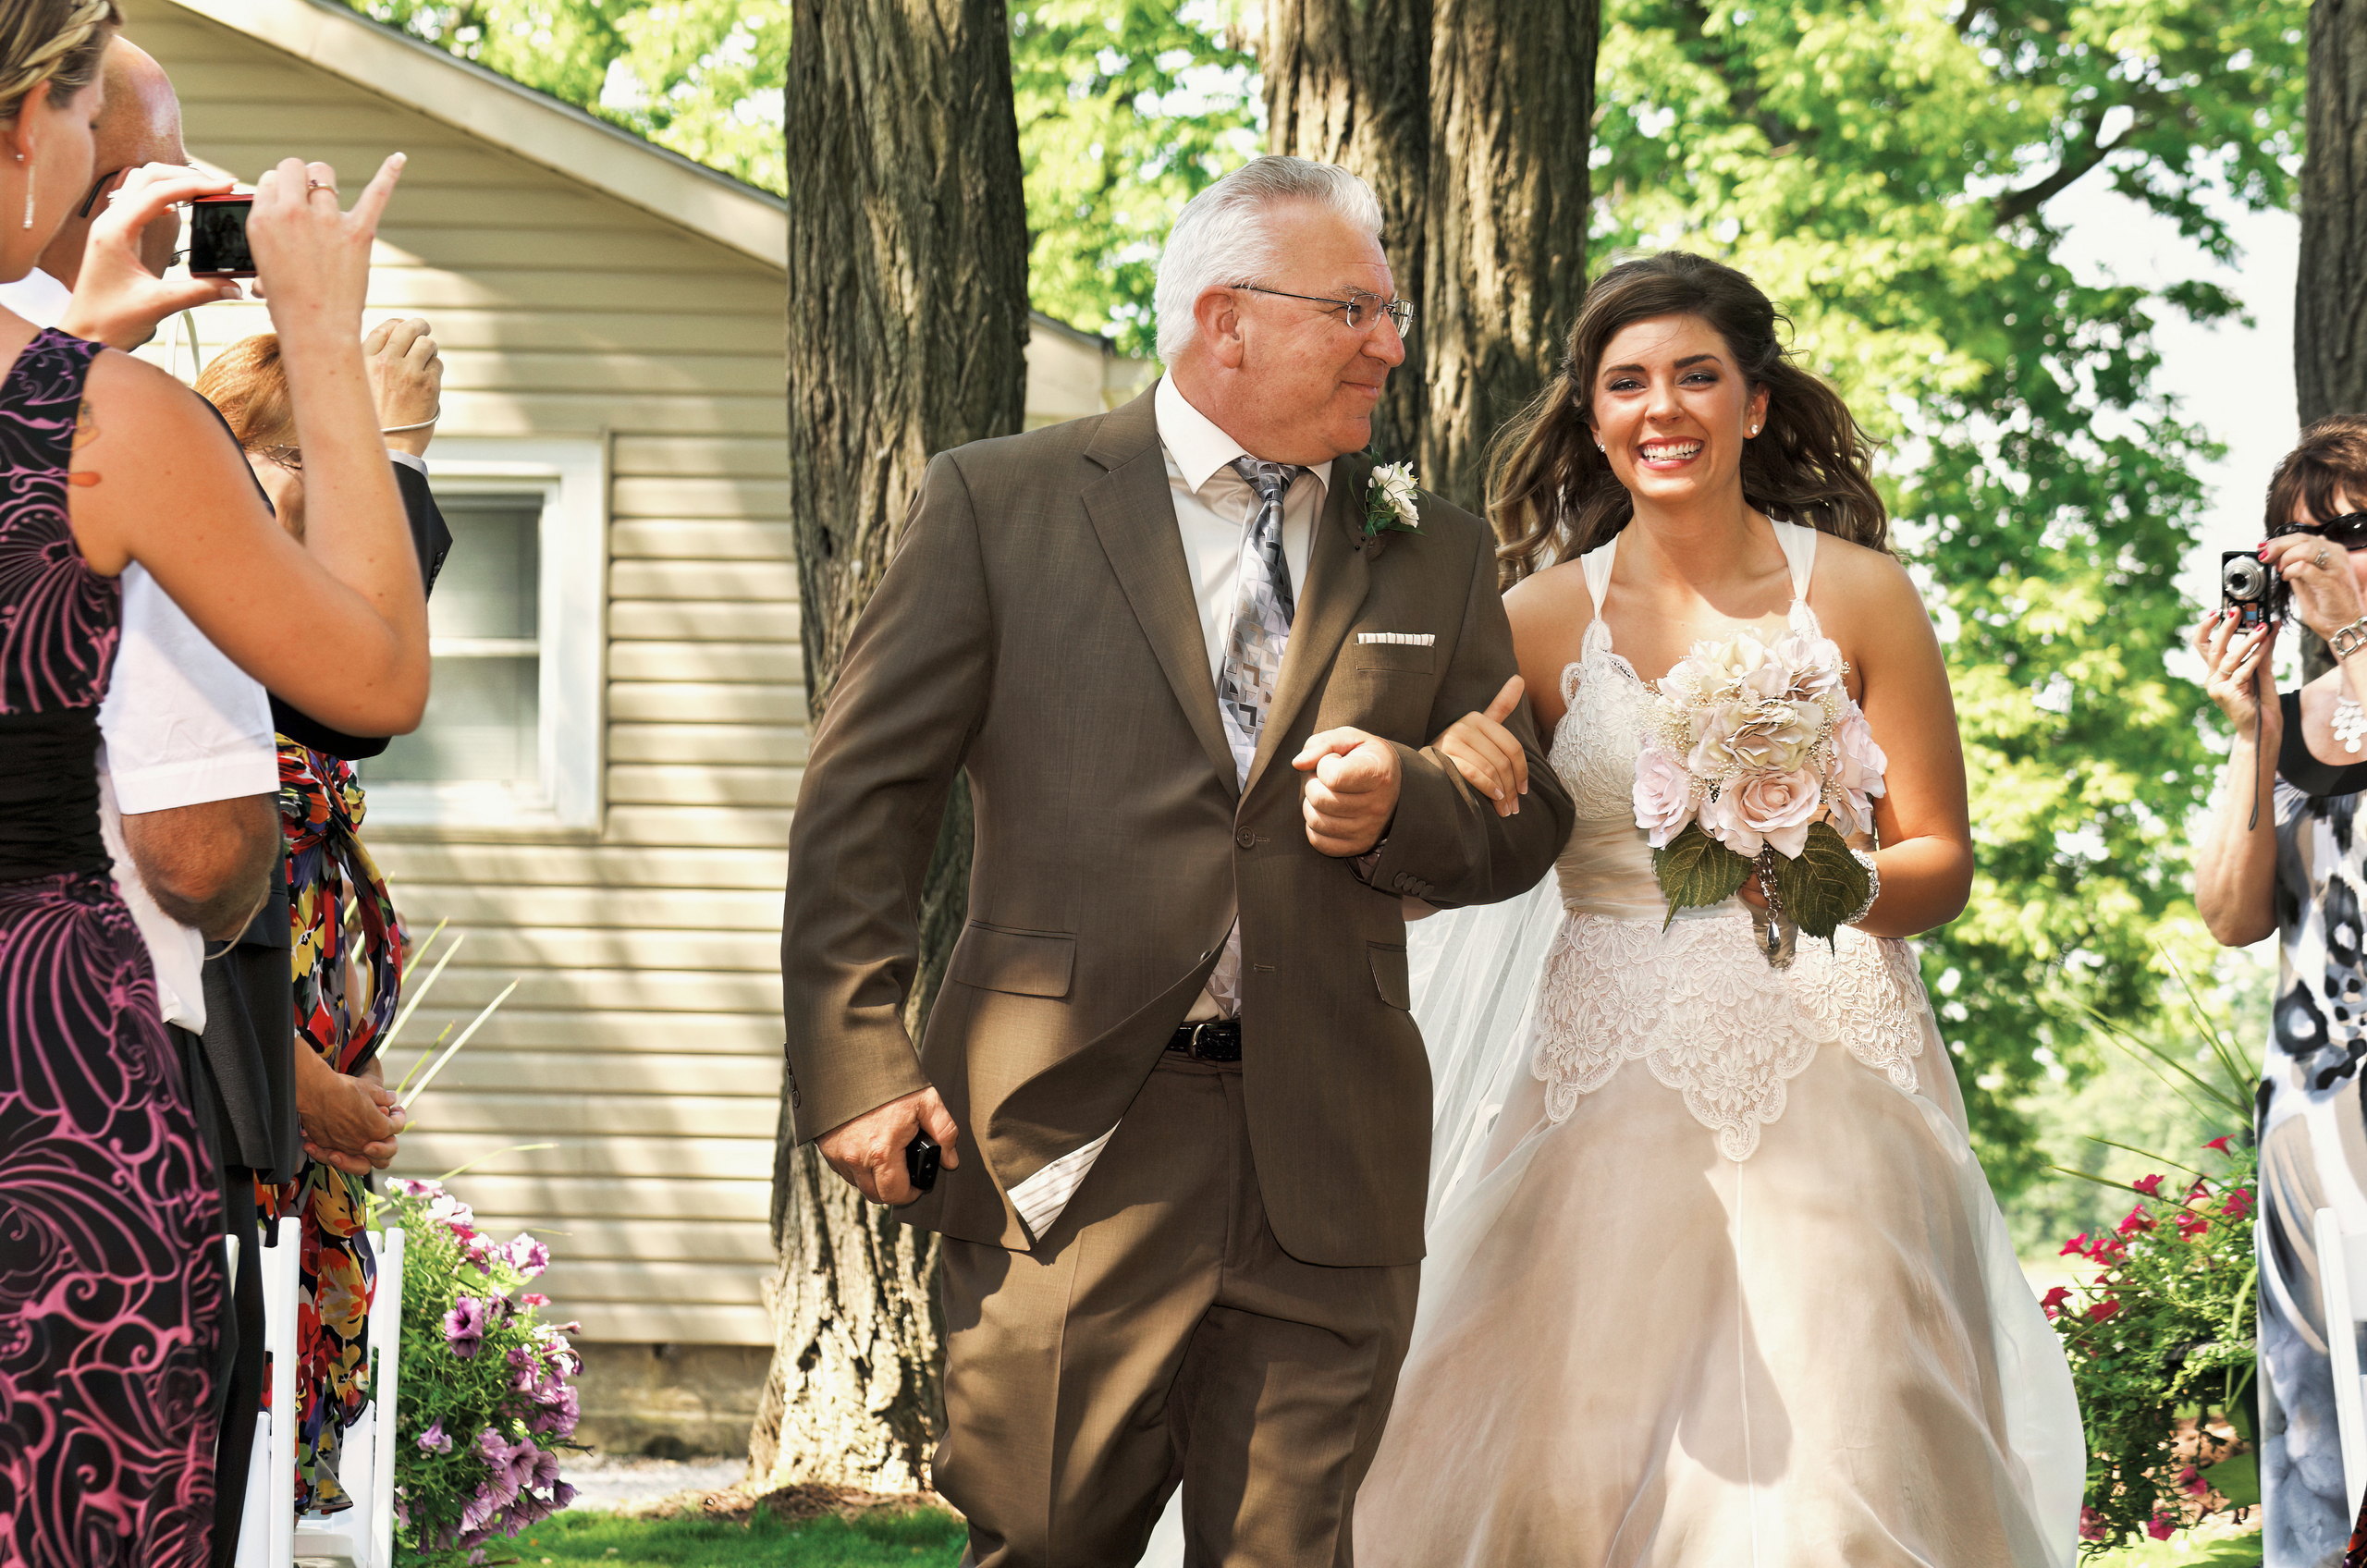 Father Proudly Walks his Daughter down the Aisle at Rustic Country Wedding in Omemee